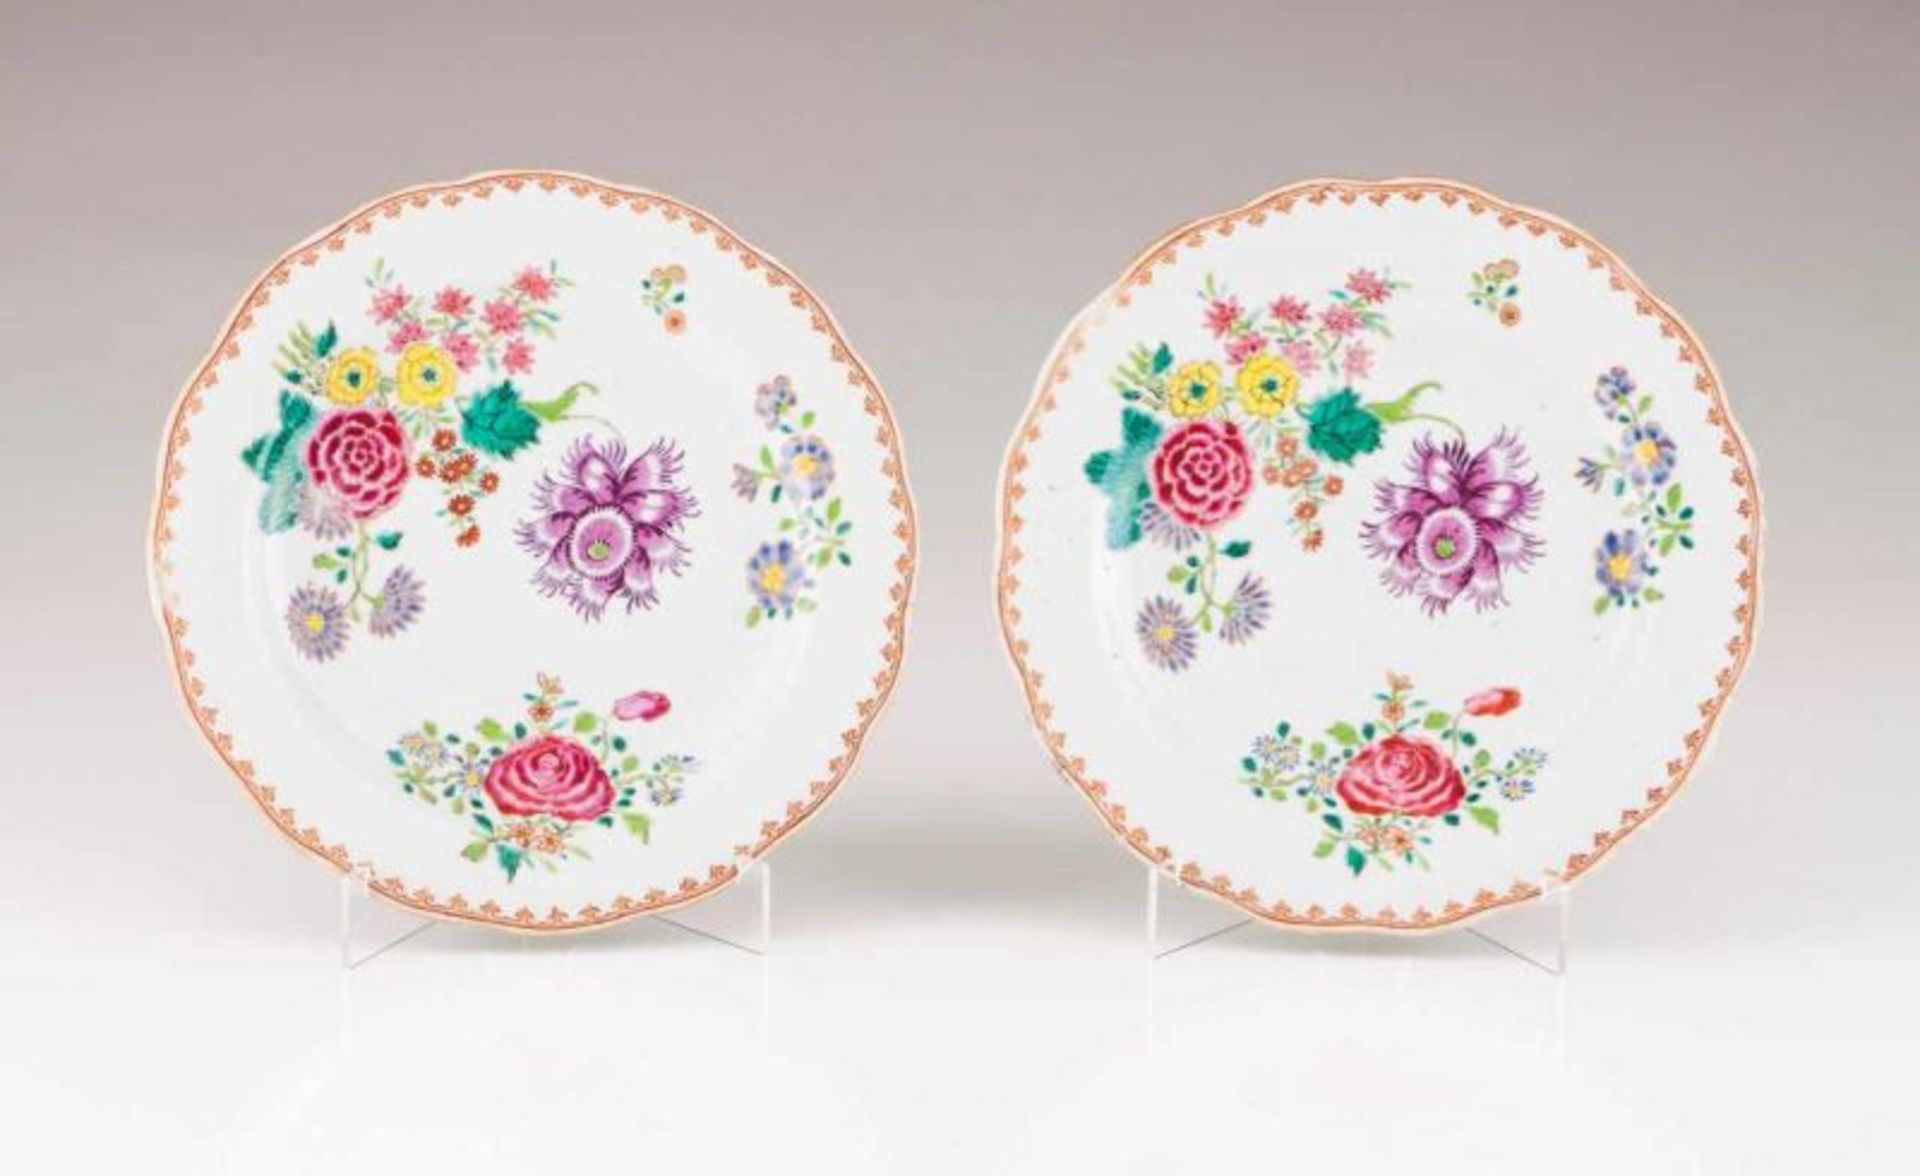 A pair of scalloped plates Chinese export porcelain Polychrome Famille Rose decoration depicting